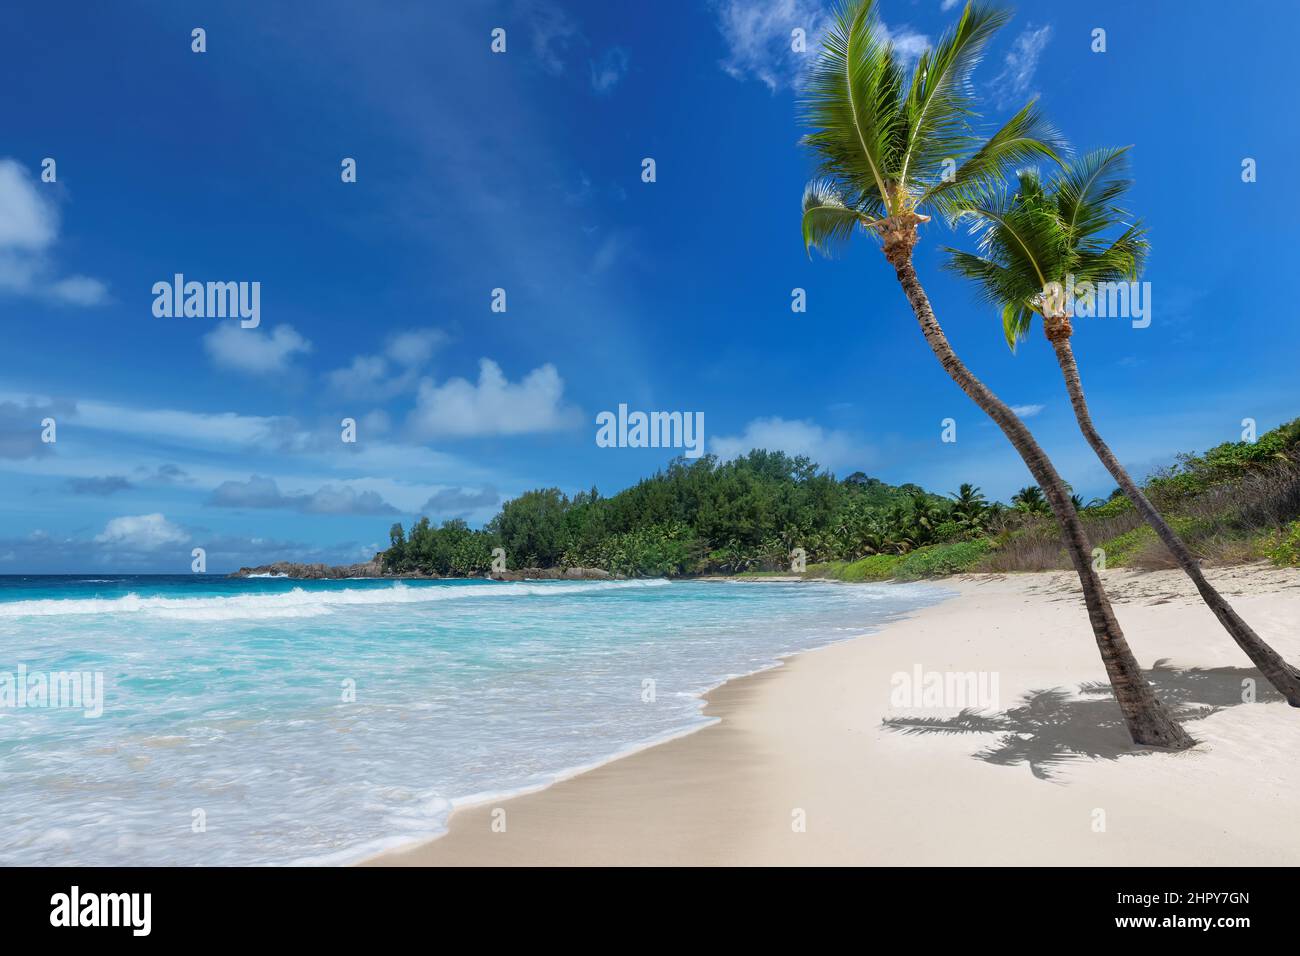 Tropical white sand beach and the turquoise sea on Caribbean island. Stock Photo